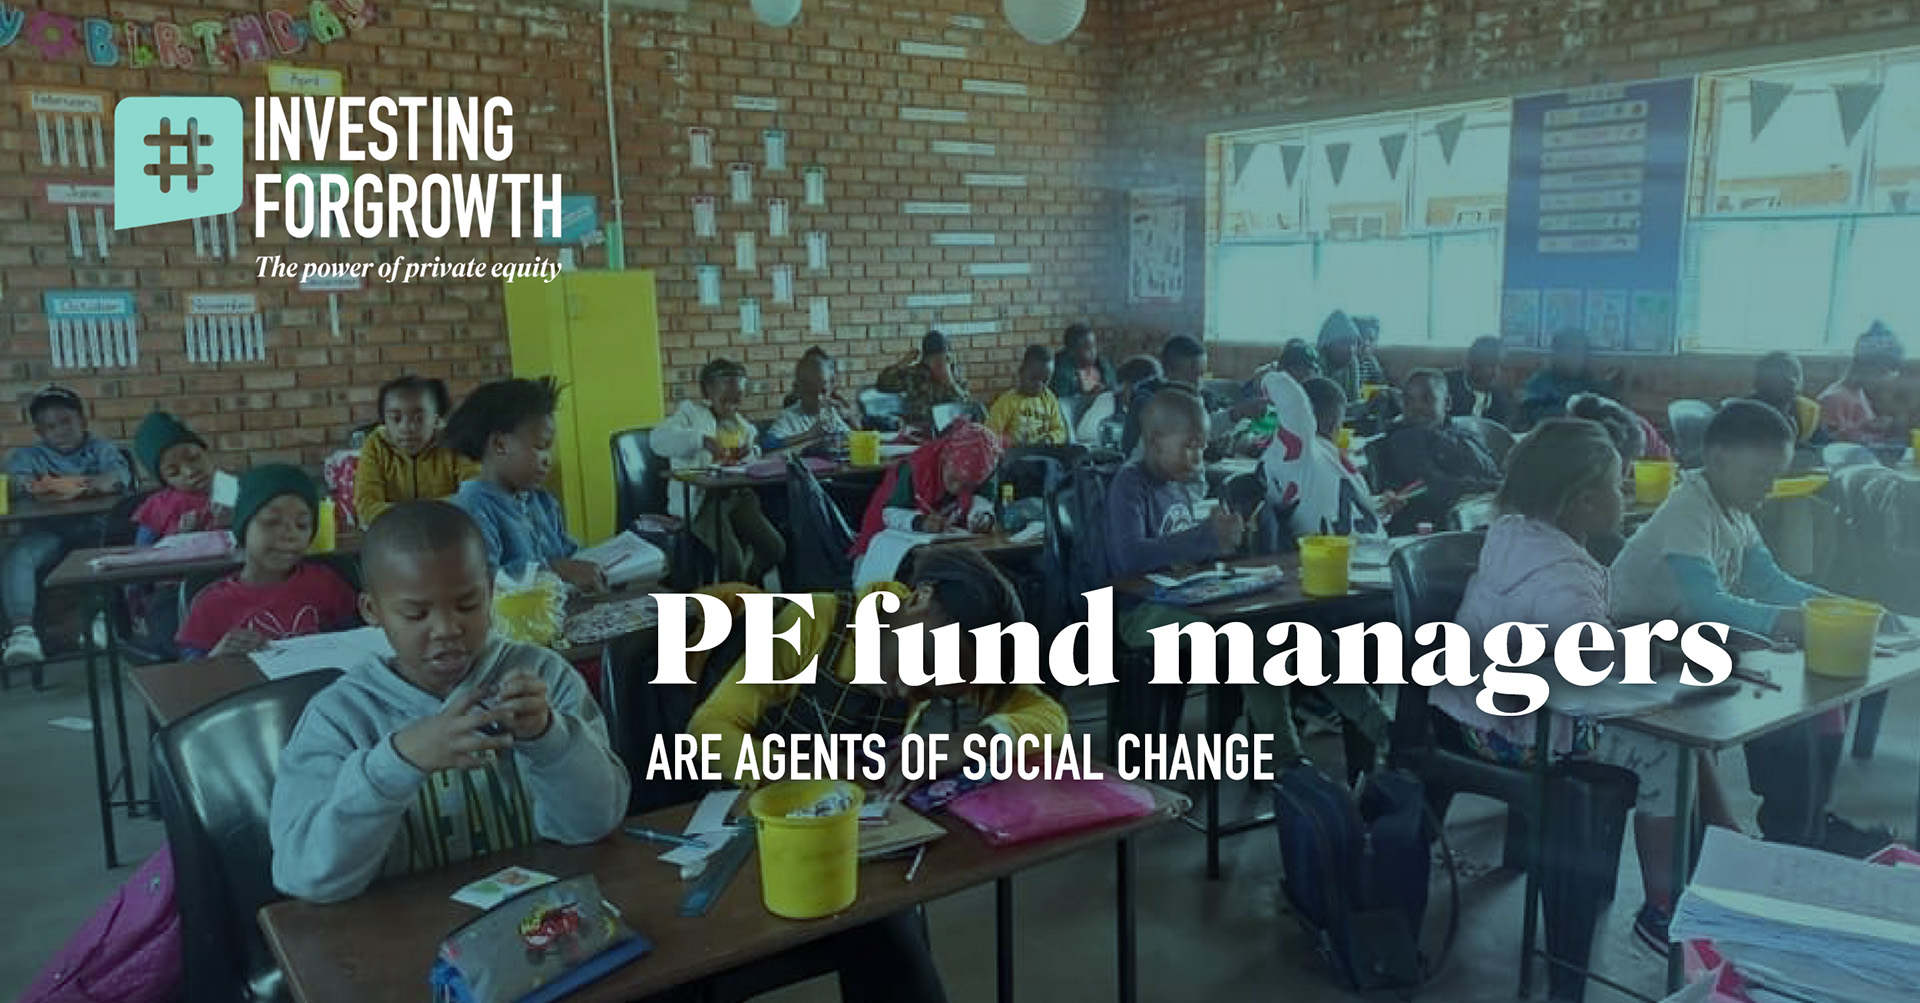 Investing for Growth - Social Change